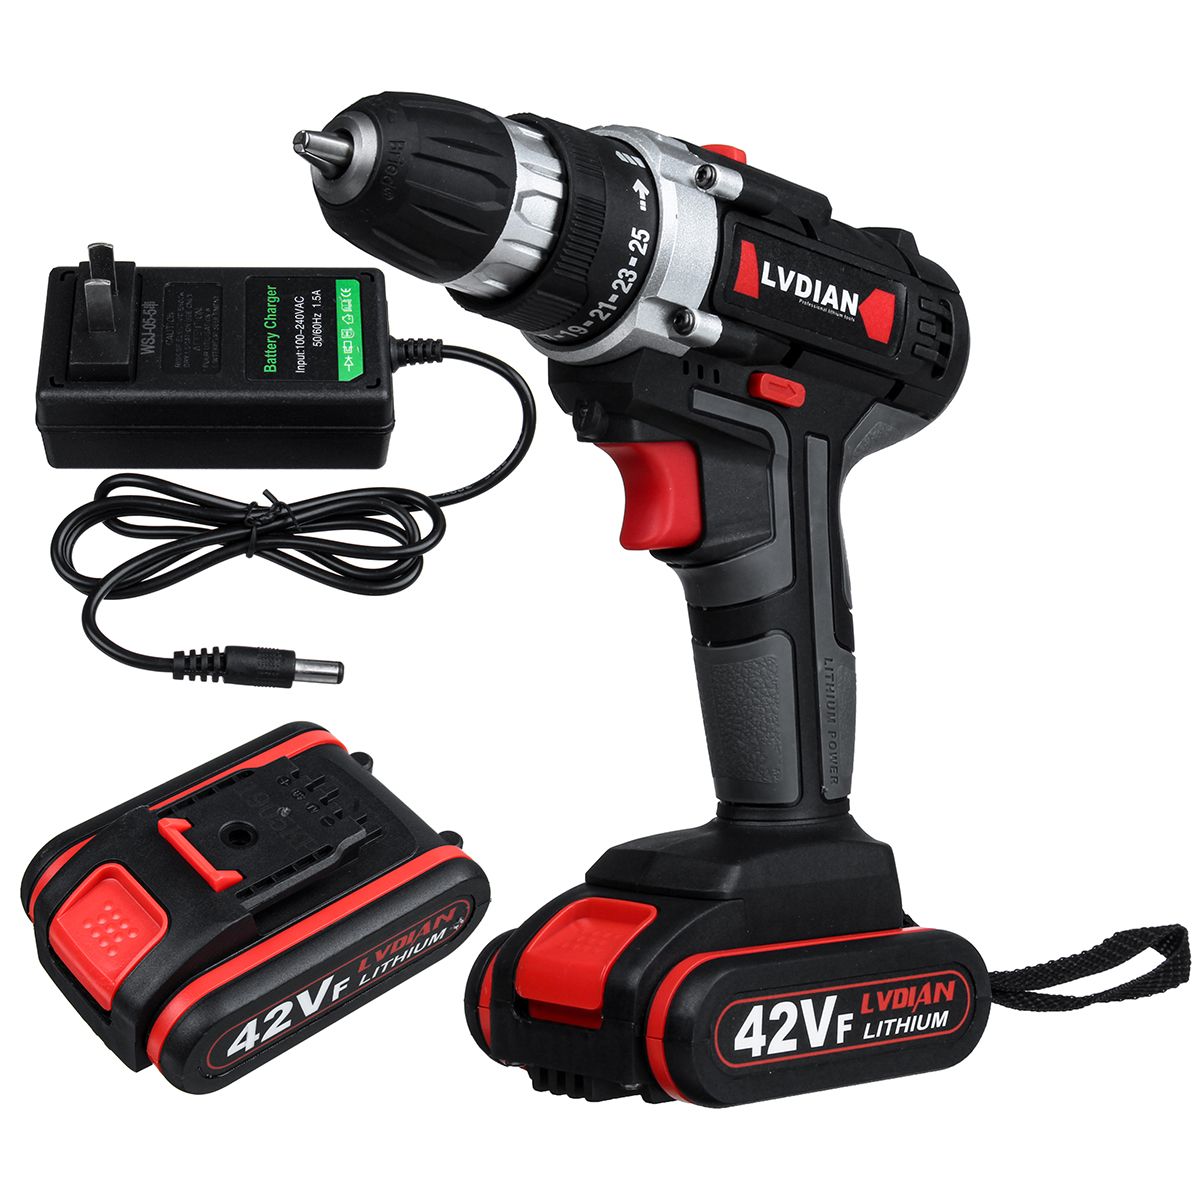 42V-Li-ion-Battery-Cordless-Electric-Impact-Drill-Driver-Electric-Screwdriver-1563229